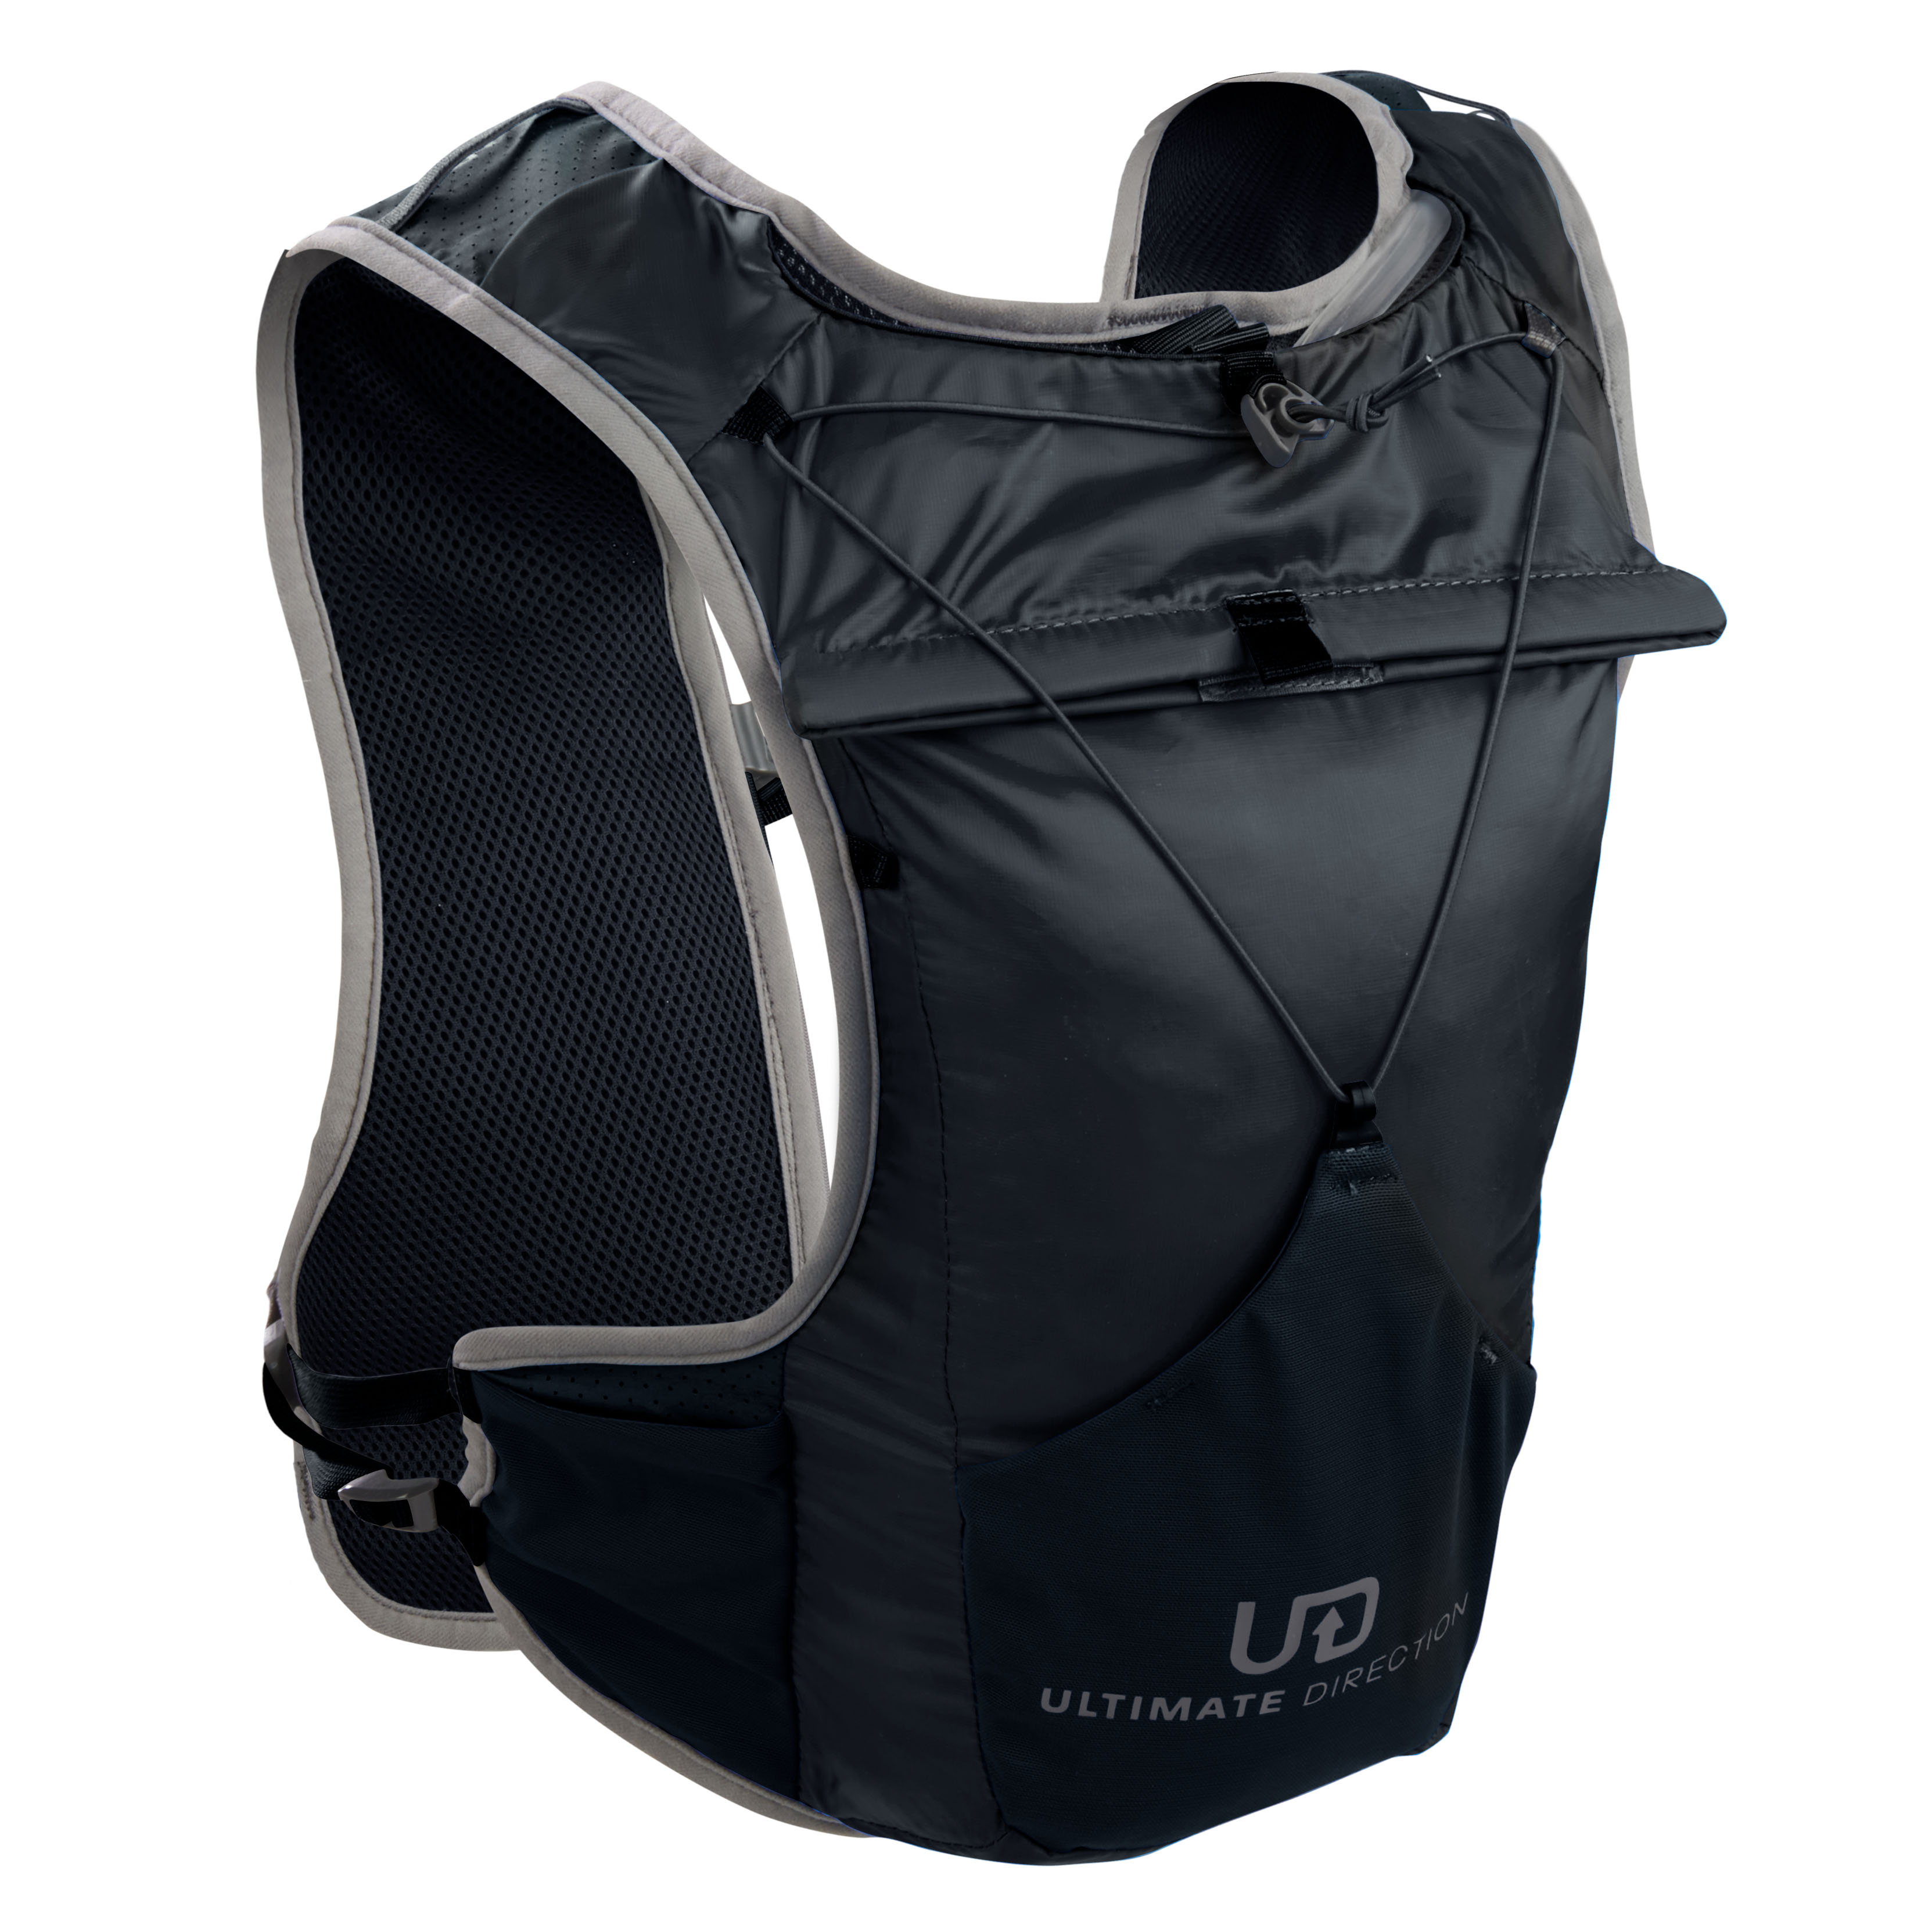 Ultimate Direction Trail Vest in Onyx Size Medium/Large